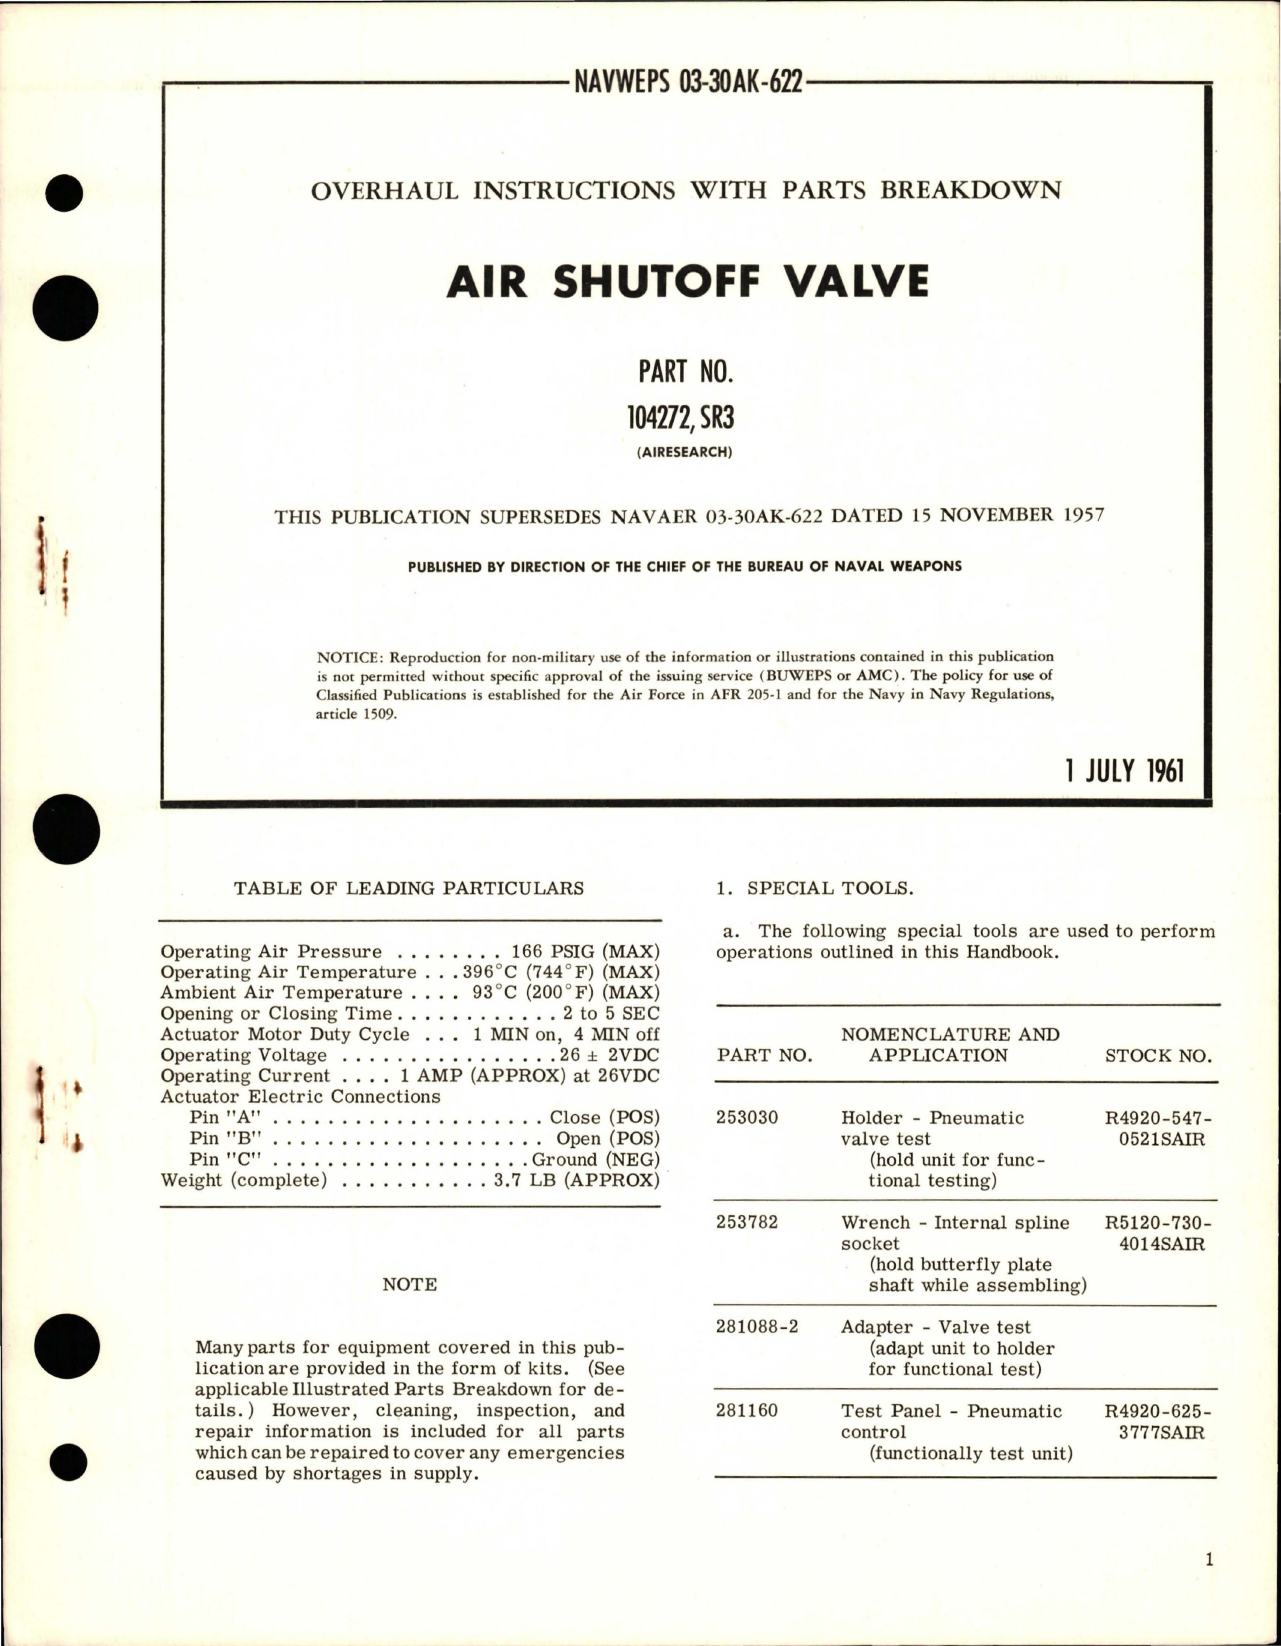 Sample page 1 from AirCorps Library document: Overhaul Instructions with Parts Breakdown for Air Shutoff Valve - Part 104272, SR2